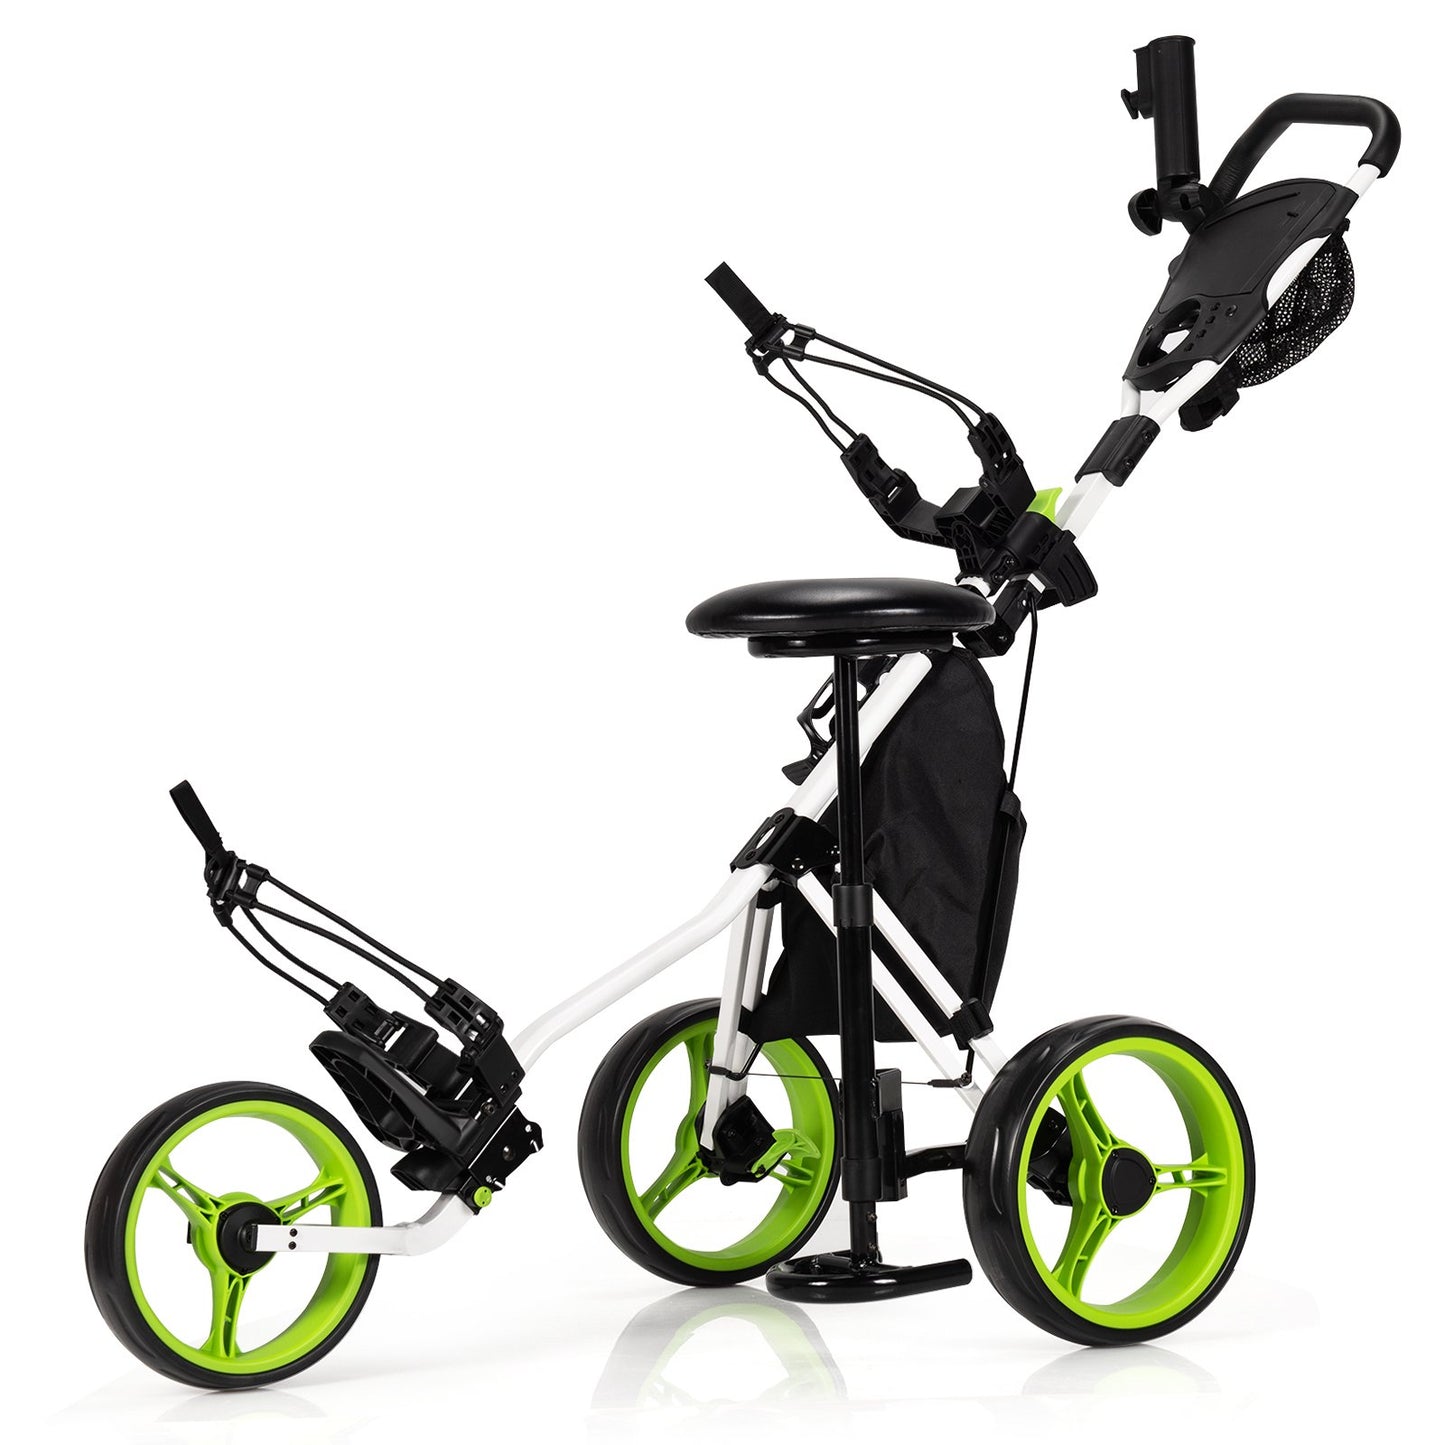 3 Wheels Folding Golf Push Cart with Seat Scoreboard and Adjustable Handle, Green - Gallery Canada